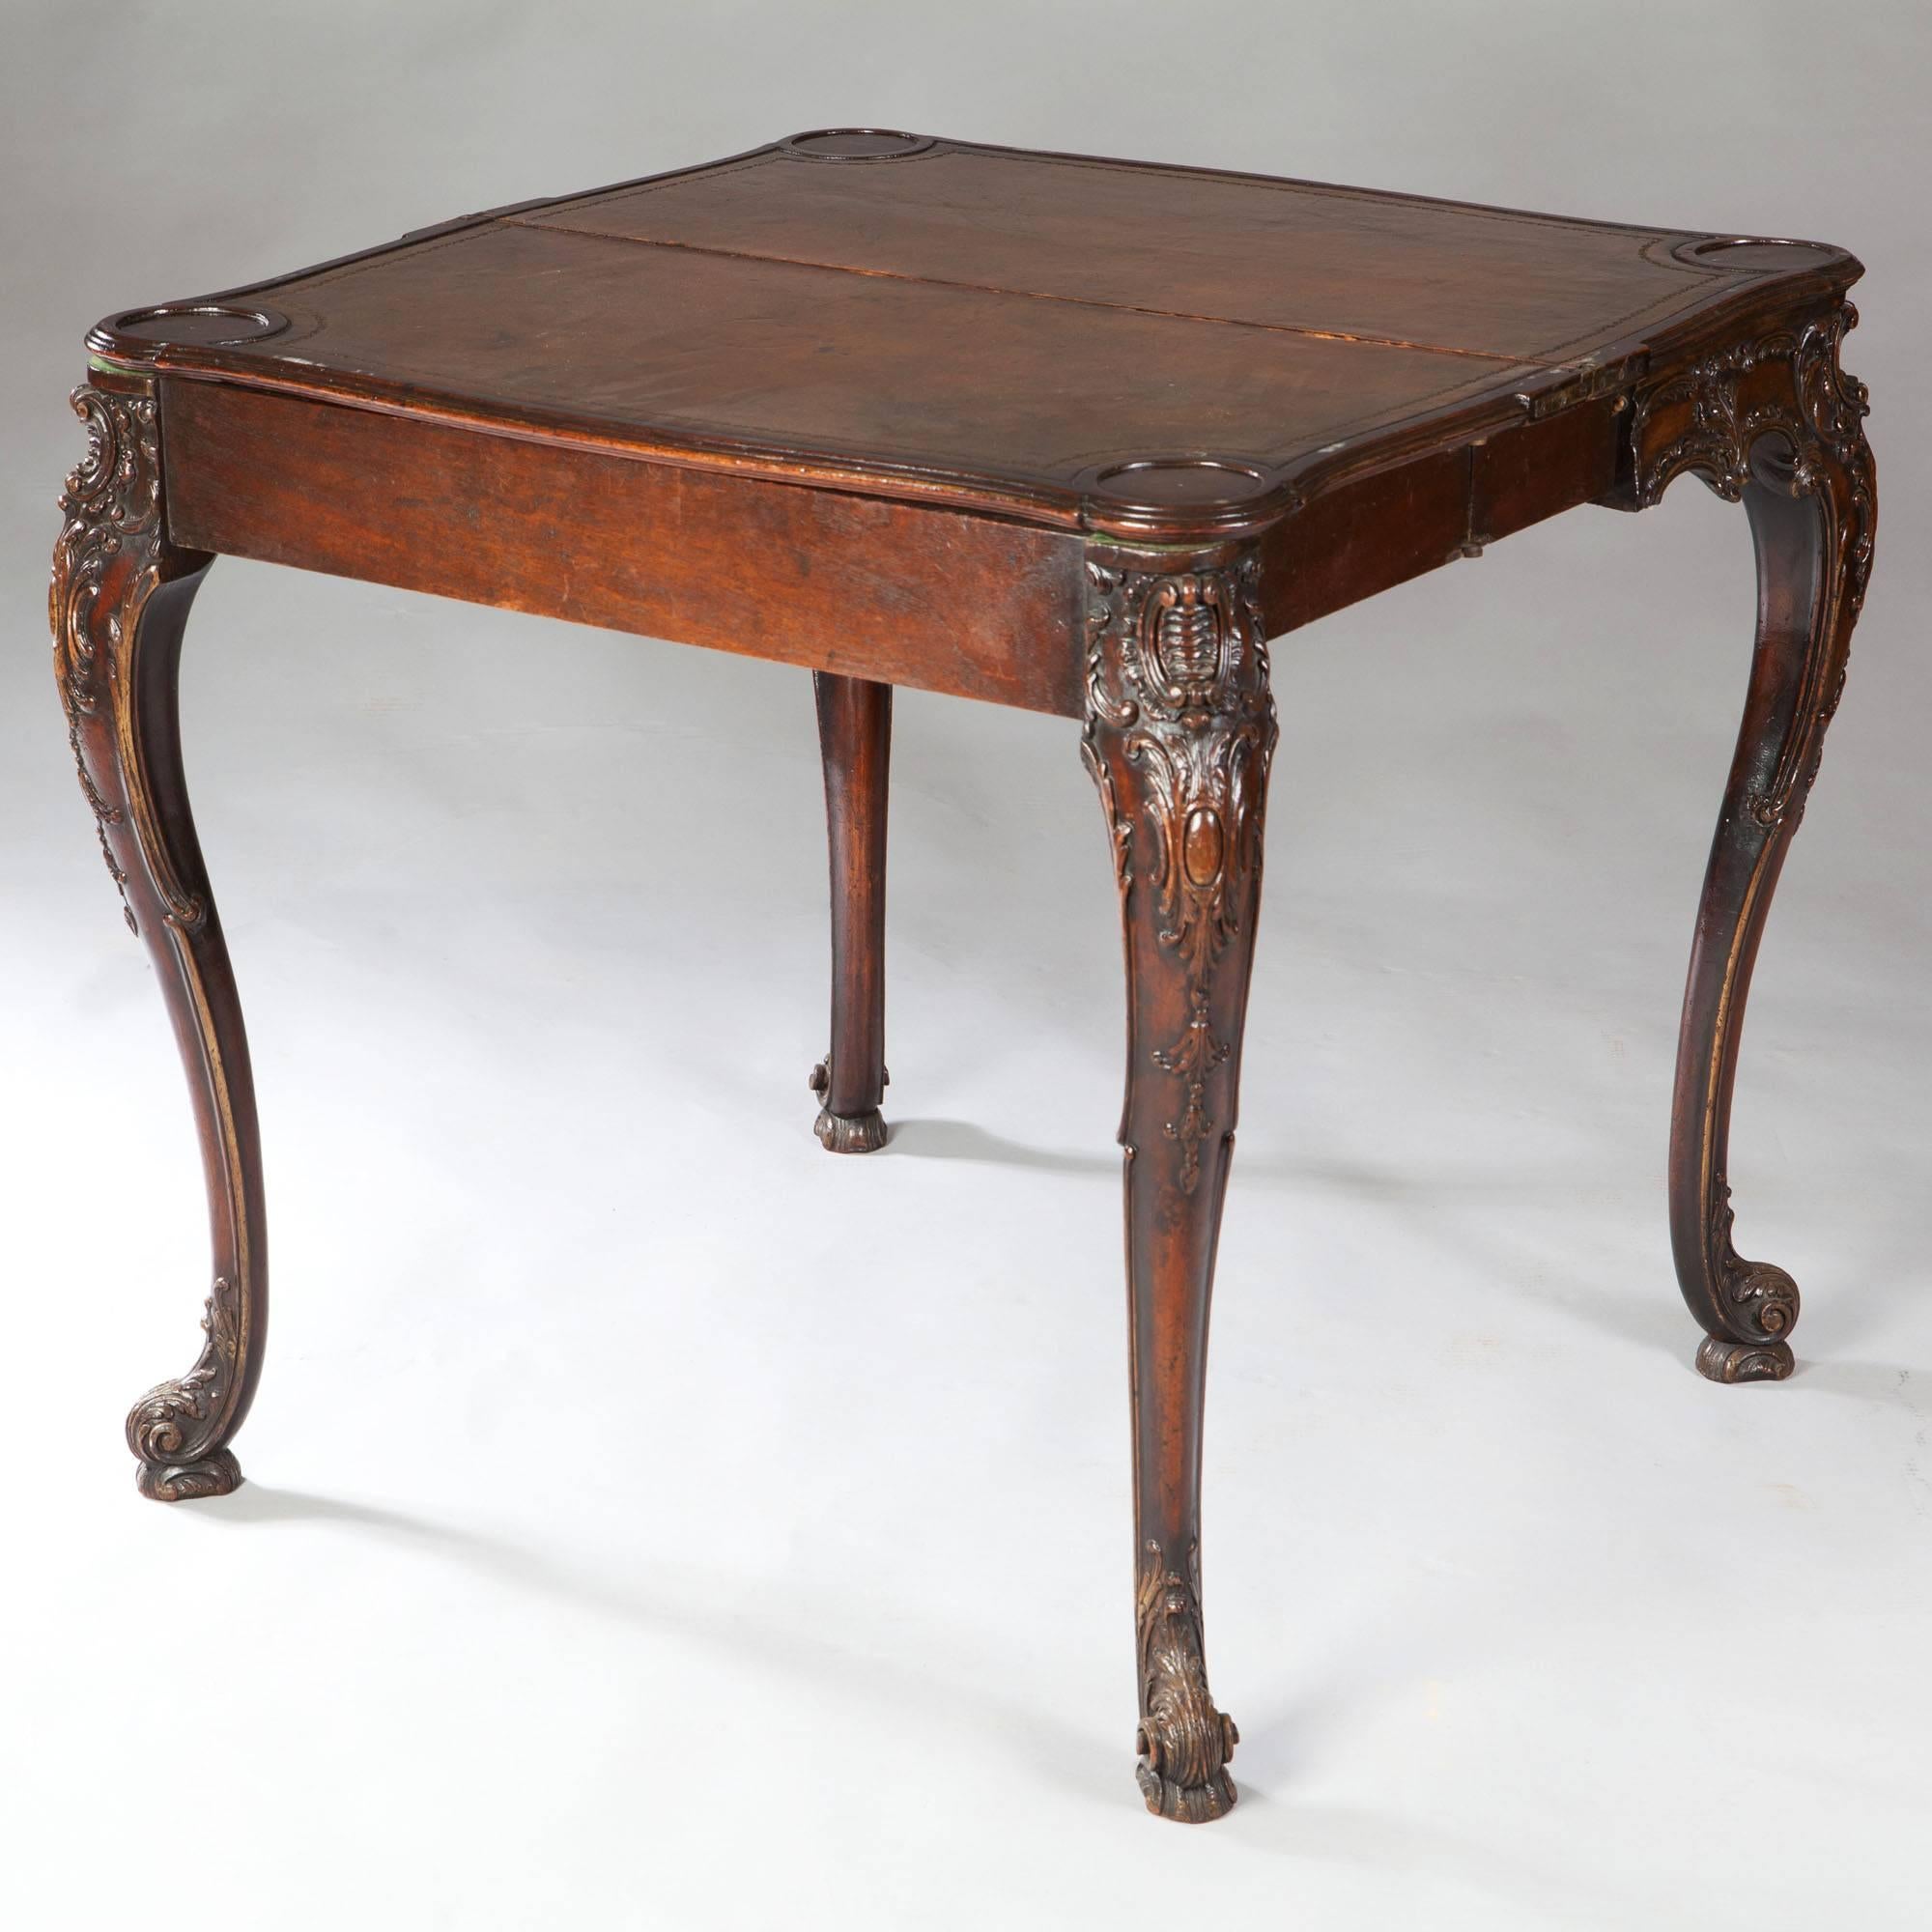 19th Century Rococo Card Table In Excellent Condition In London, by appointment only